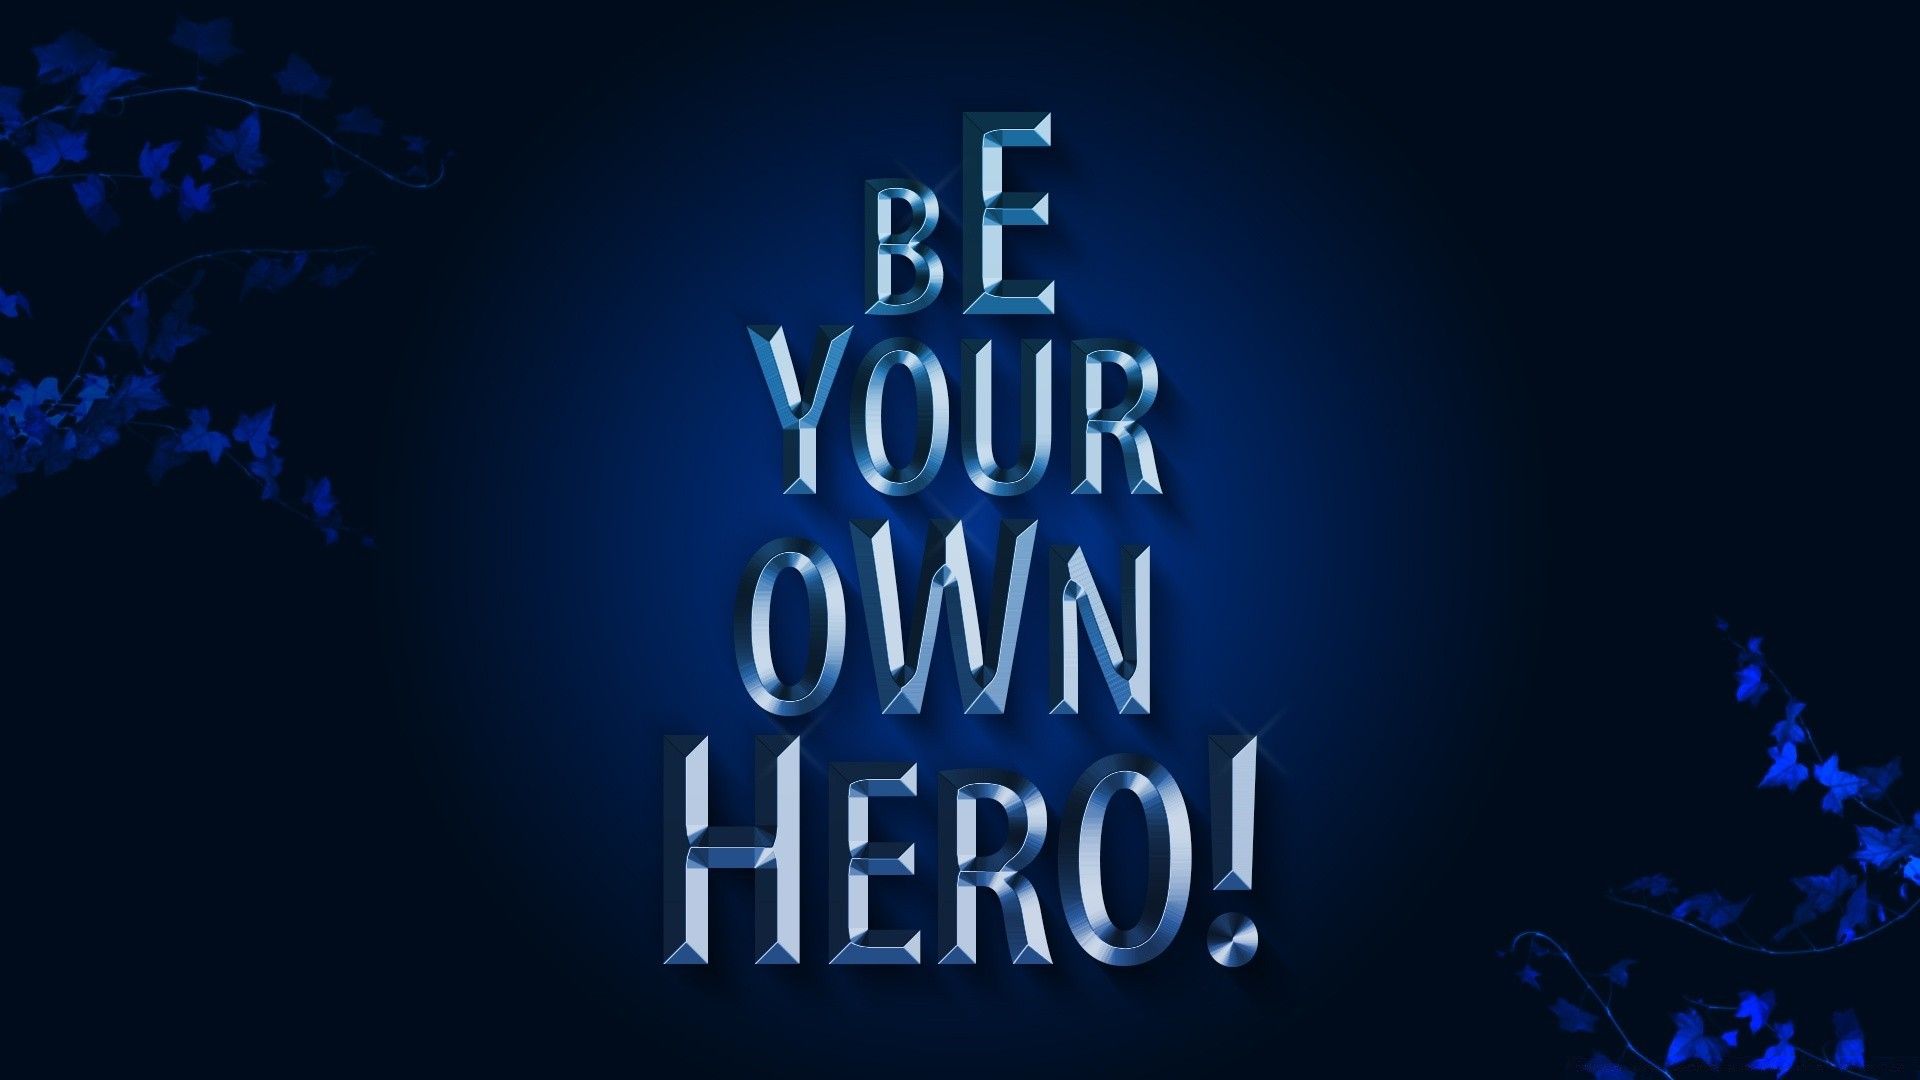 Be_Your_Own_Hero Wallpapermillion Wallpaper.com